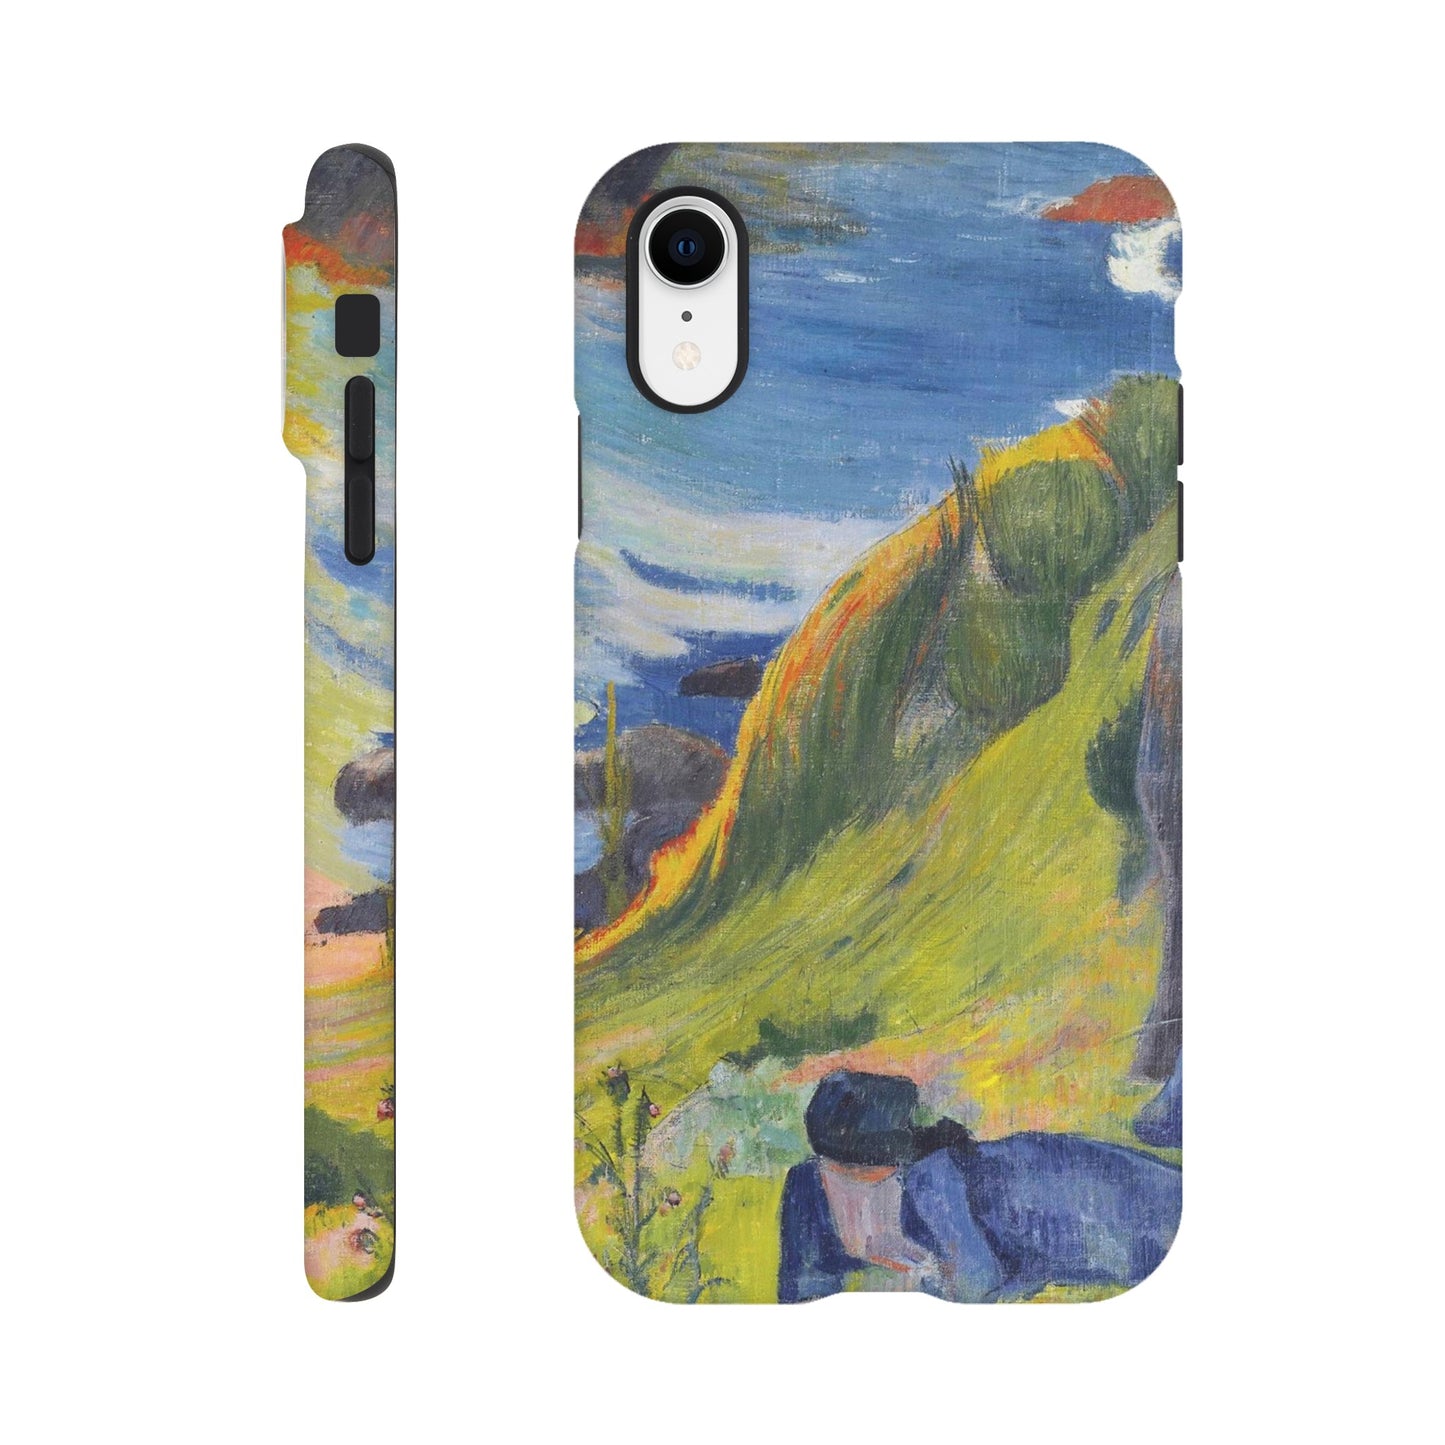 a phone case with a painting of cows on a hillside